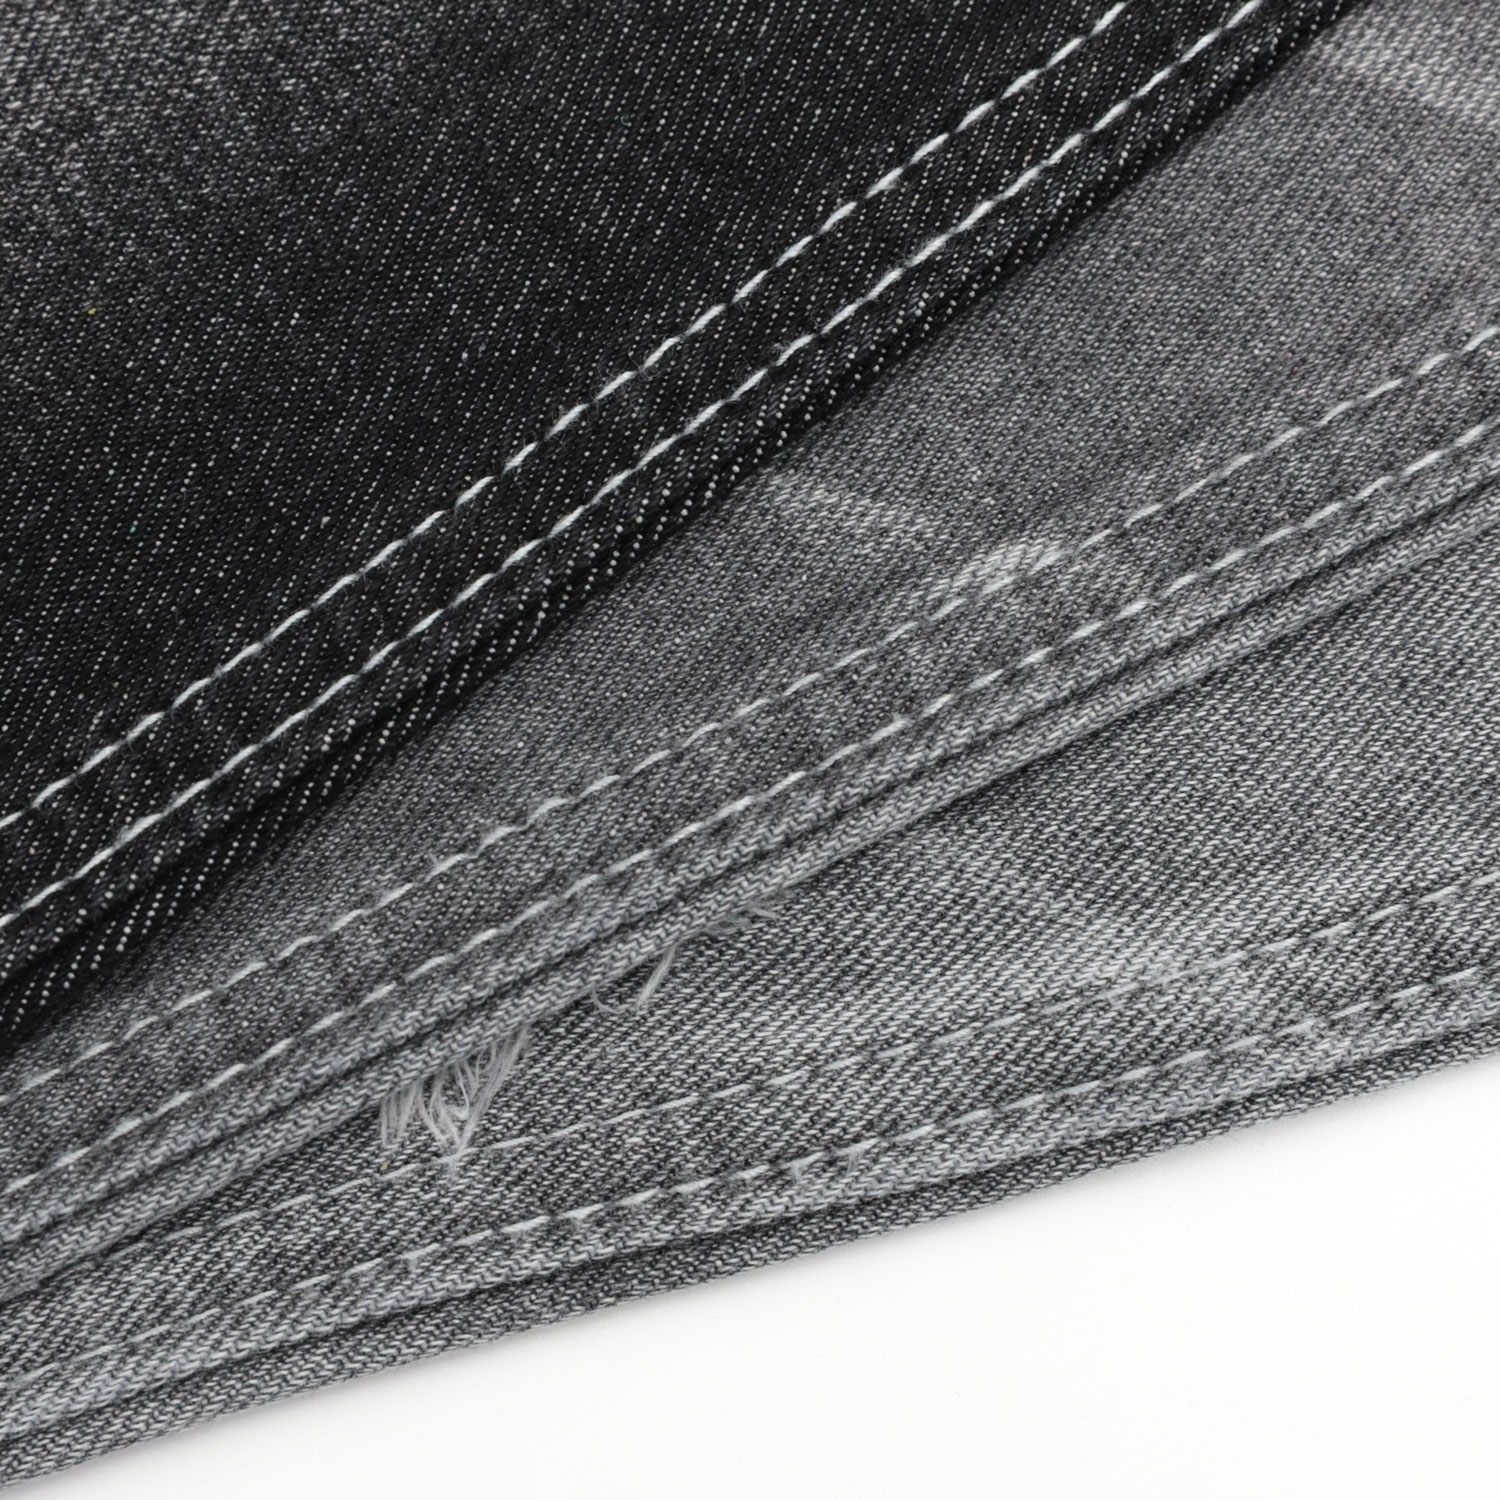 The Evolution of the Denim Fabric Textile in China 2